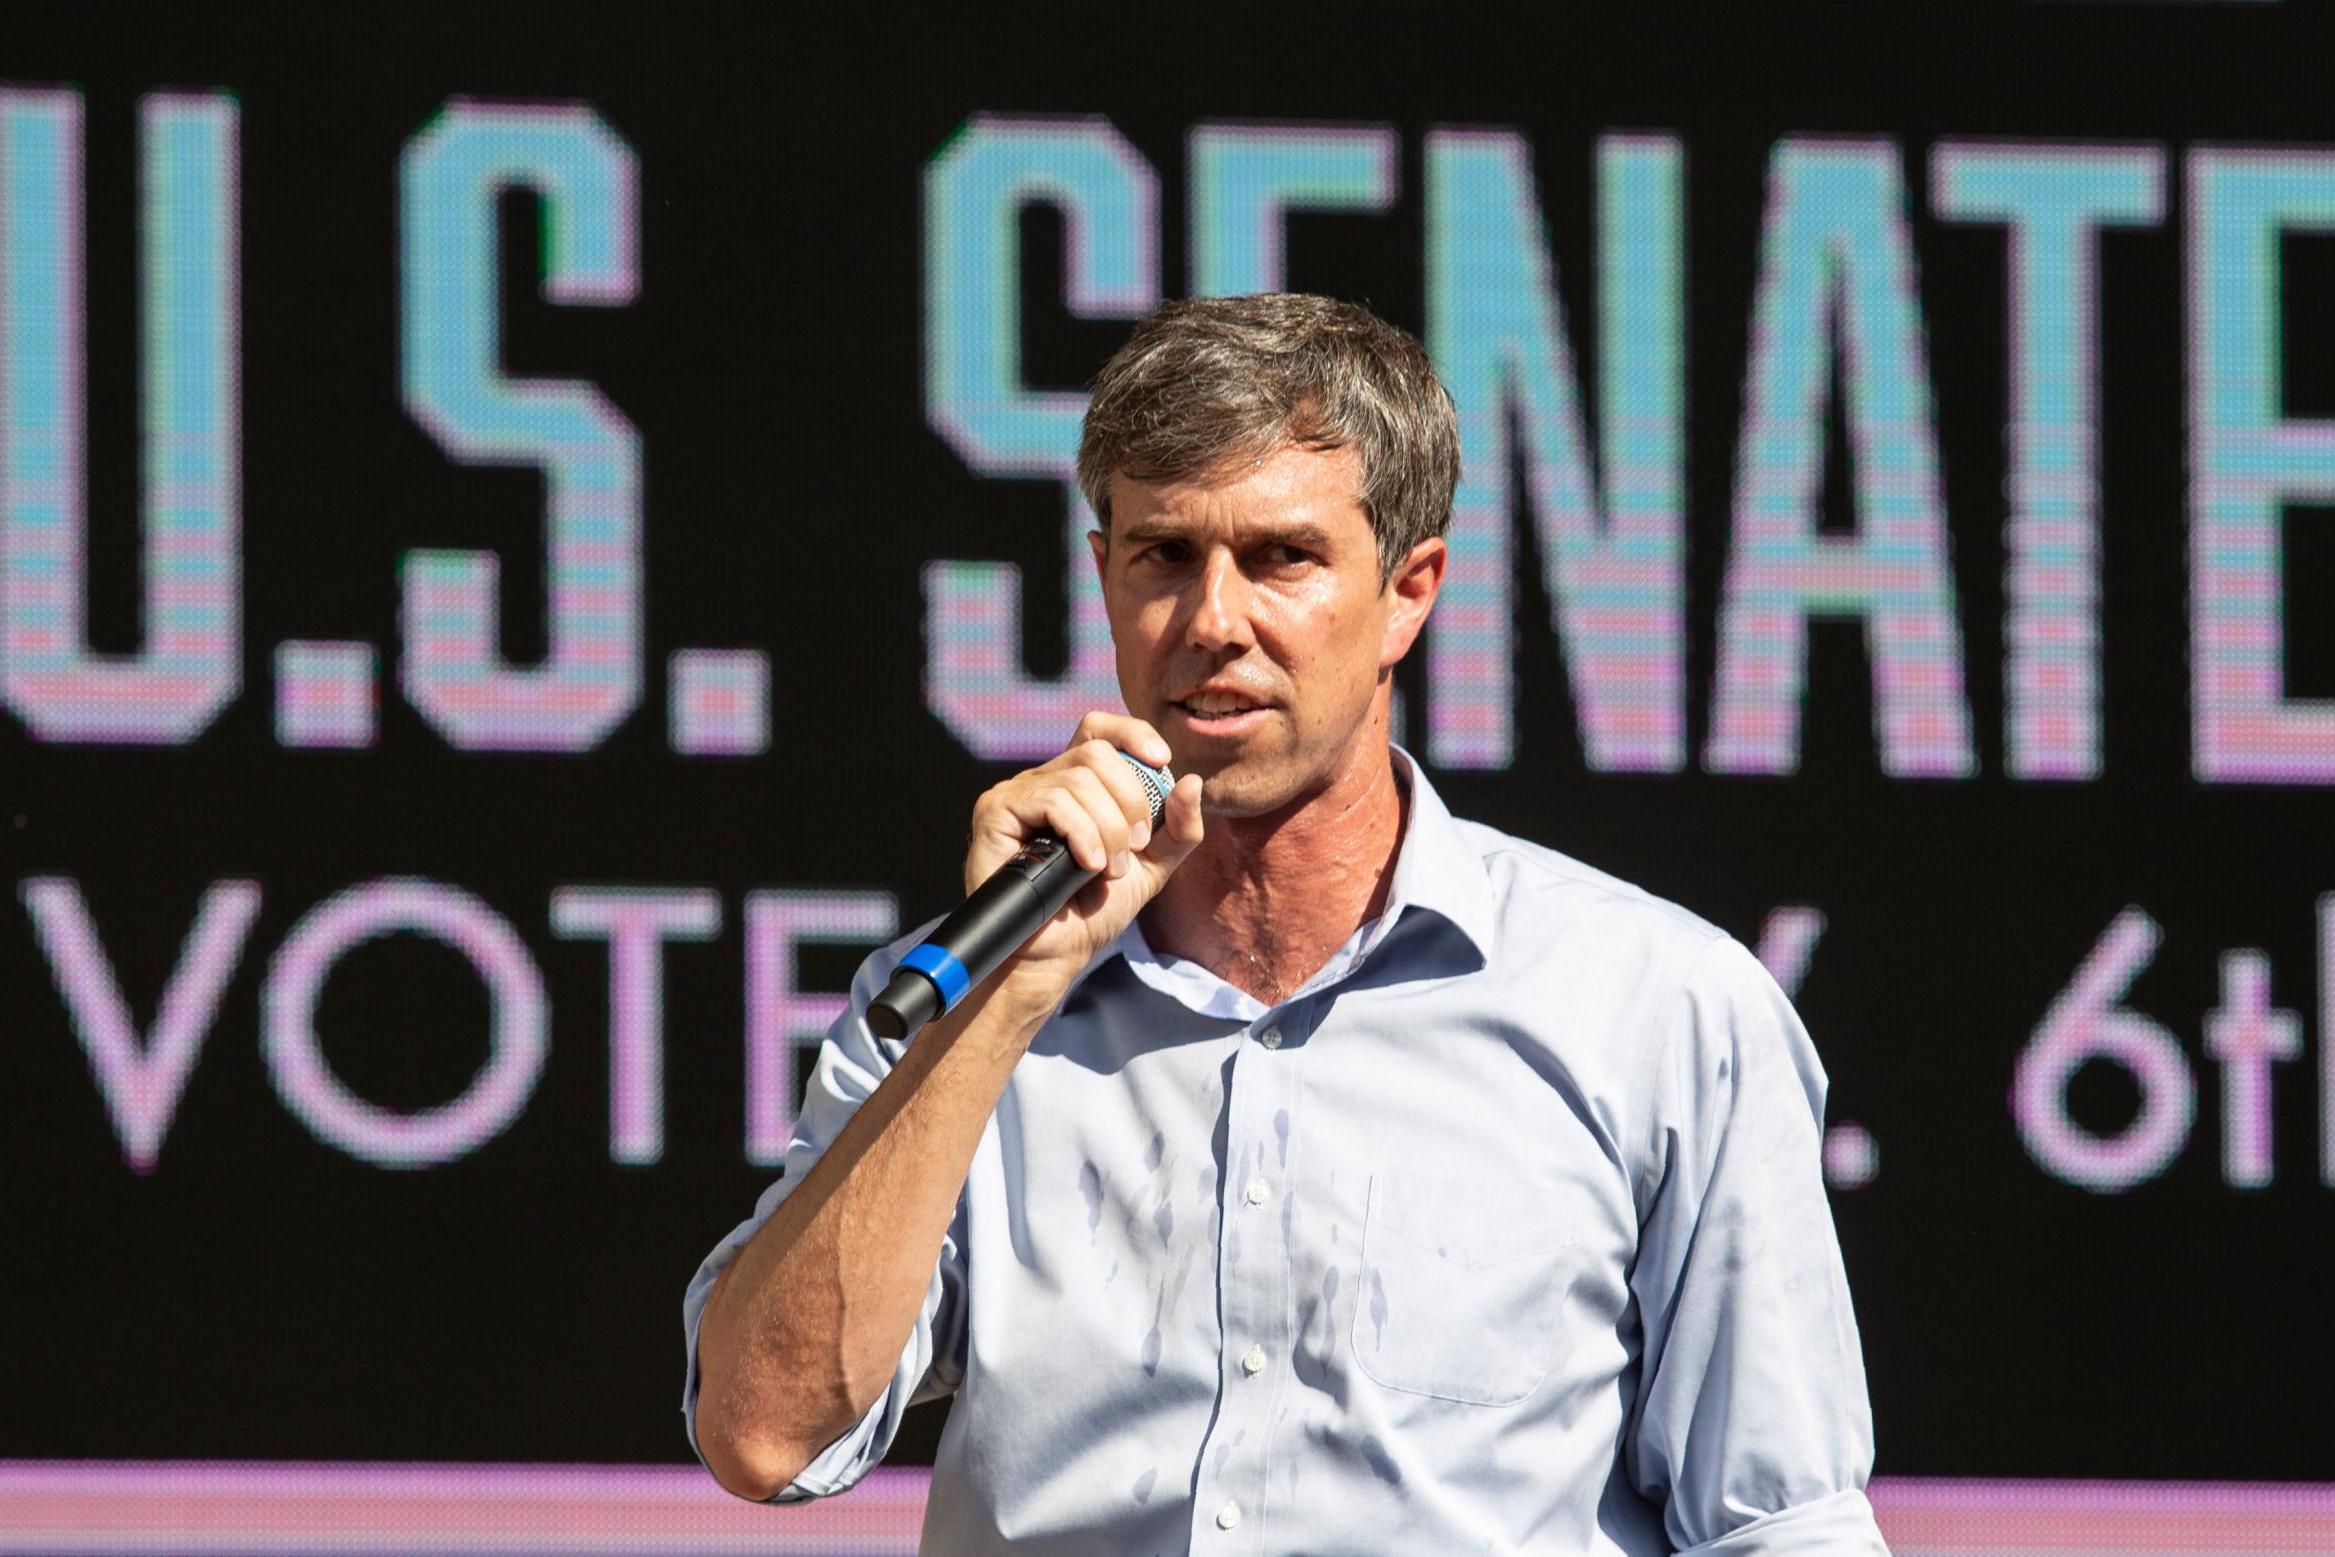 Texas Senate Democratic candidate Beto O'Rourke received threatening Facebook messages from pipe bomb package suspect Cesar Sayoc